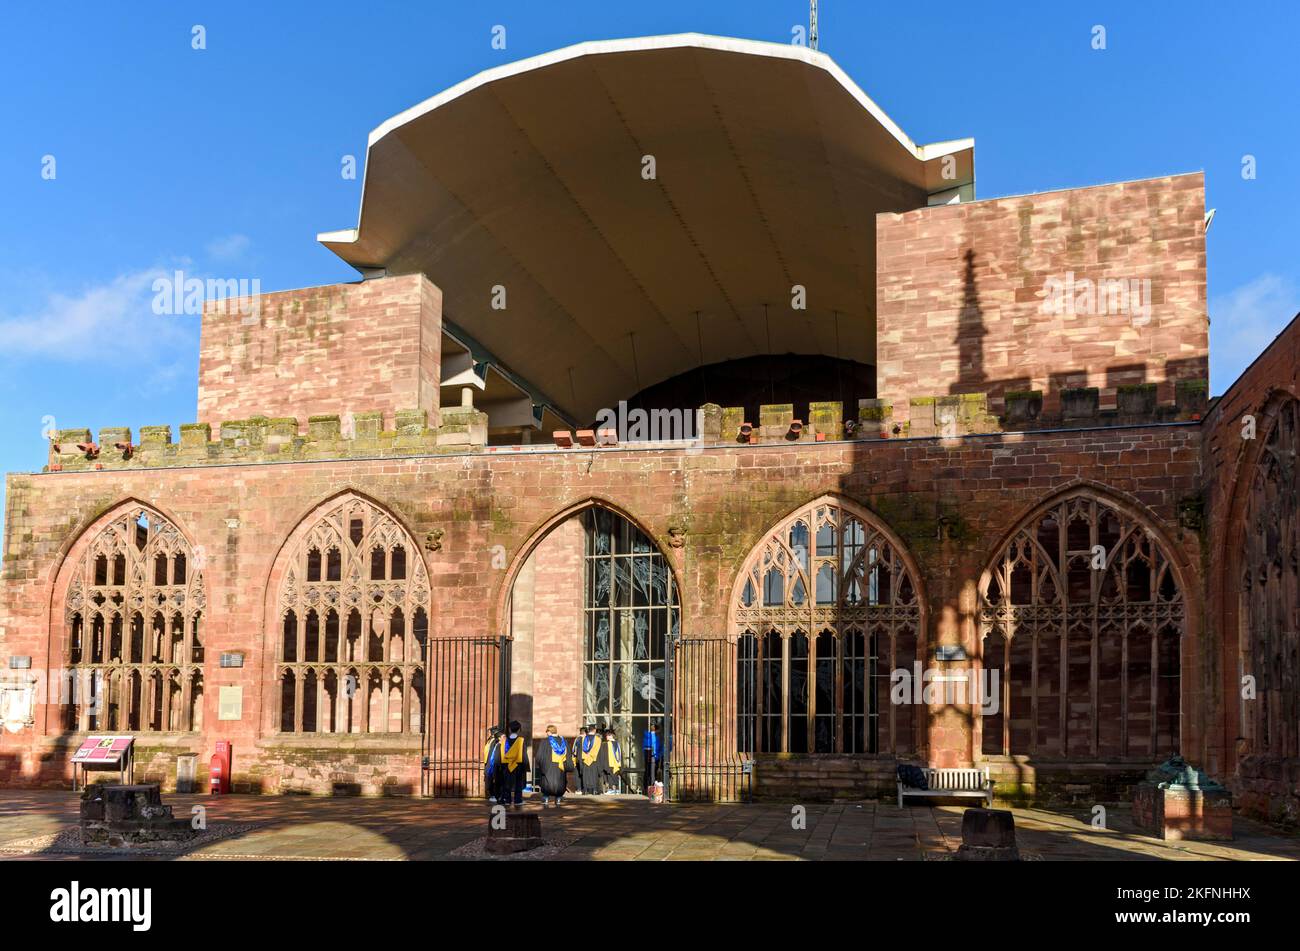 The roof of the entrance porch of Coventry Cathedral from the ruins of the old cathedral.  Coventry, West Midlands, England, UK Stock Photo